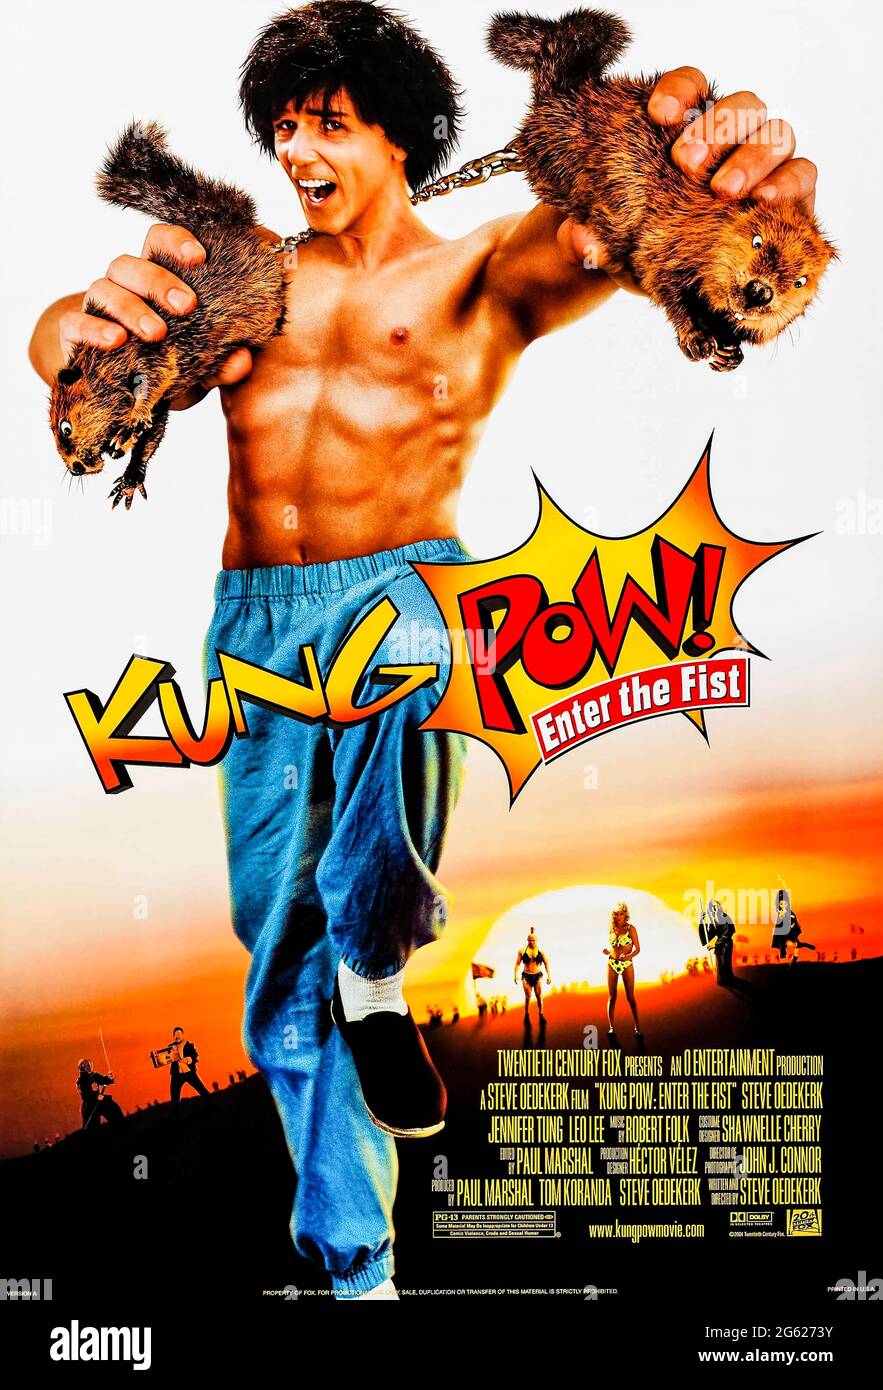 Kung Pow: Enter the Fist (2002) directed by Steve Oedekerk and starring Steve Oedekerk, Fei Lung and Leo Lee. Original spoof martial arts movie about the Chosen One who seeks to avenge the death of his parents at the hands of kung-fu legend Master Pain told by slicing together footage from the 1976 film Tiger And Crane Fists with modern scenes and purposely badly dubbed dialogue. Stock Photo